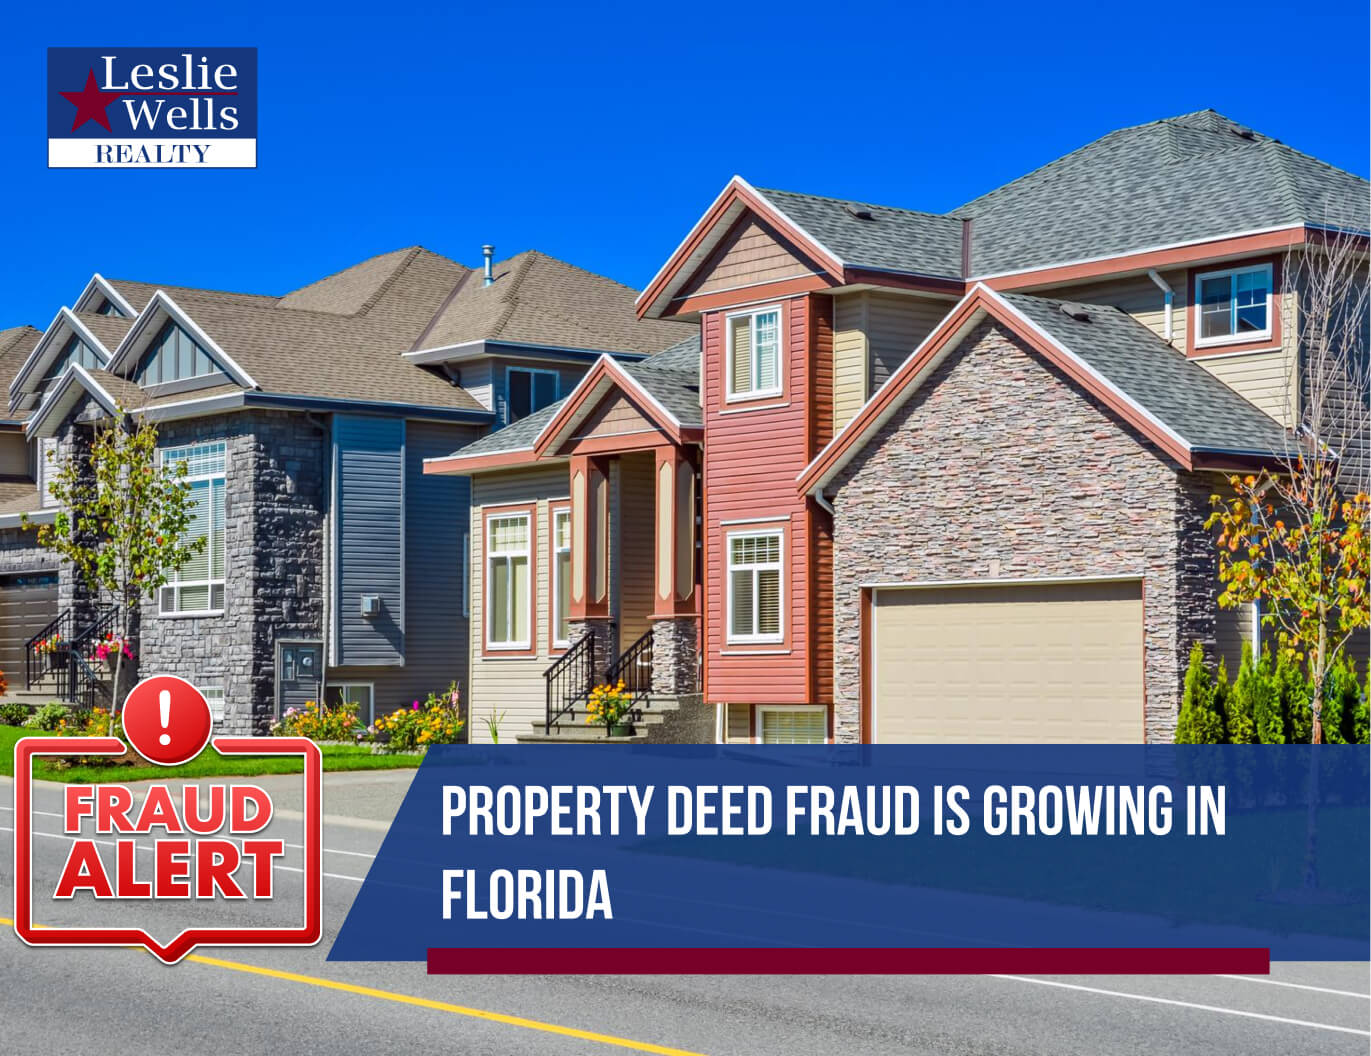 Florida’s Property Deed Fraud is a growing issue.